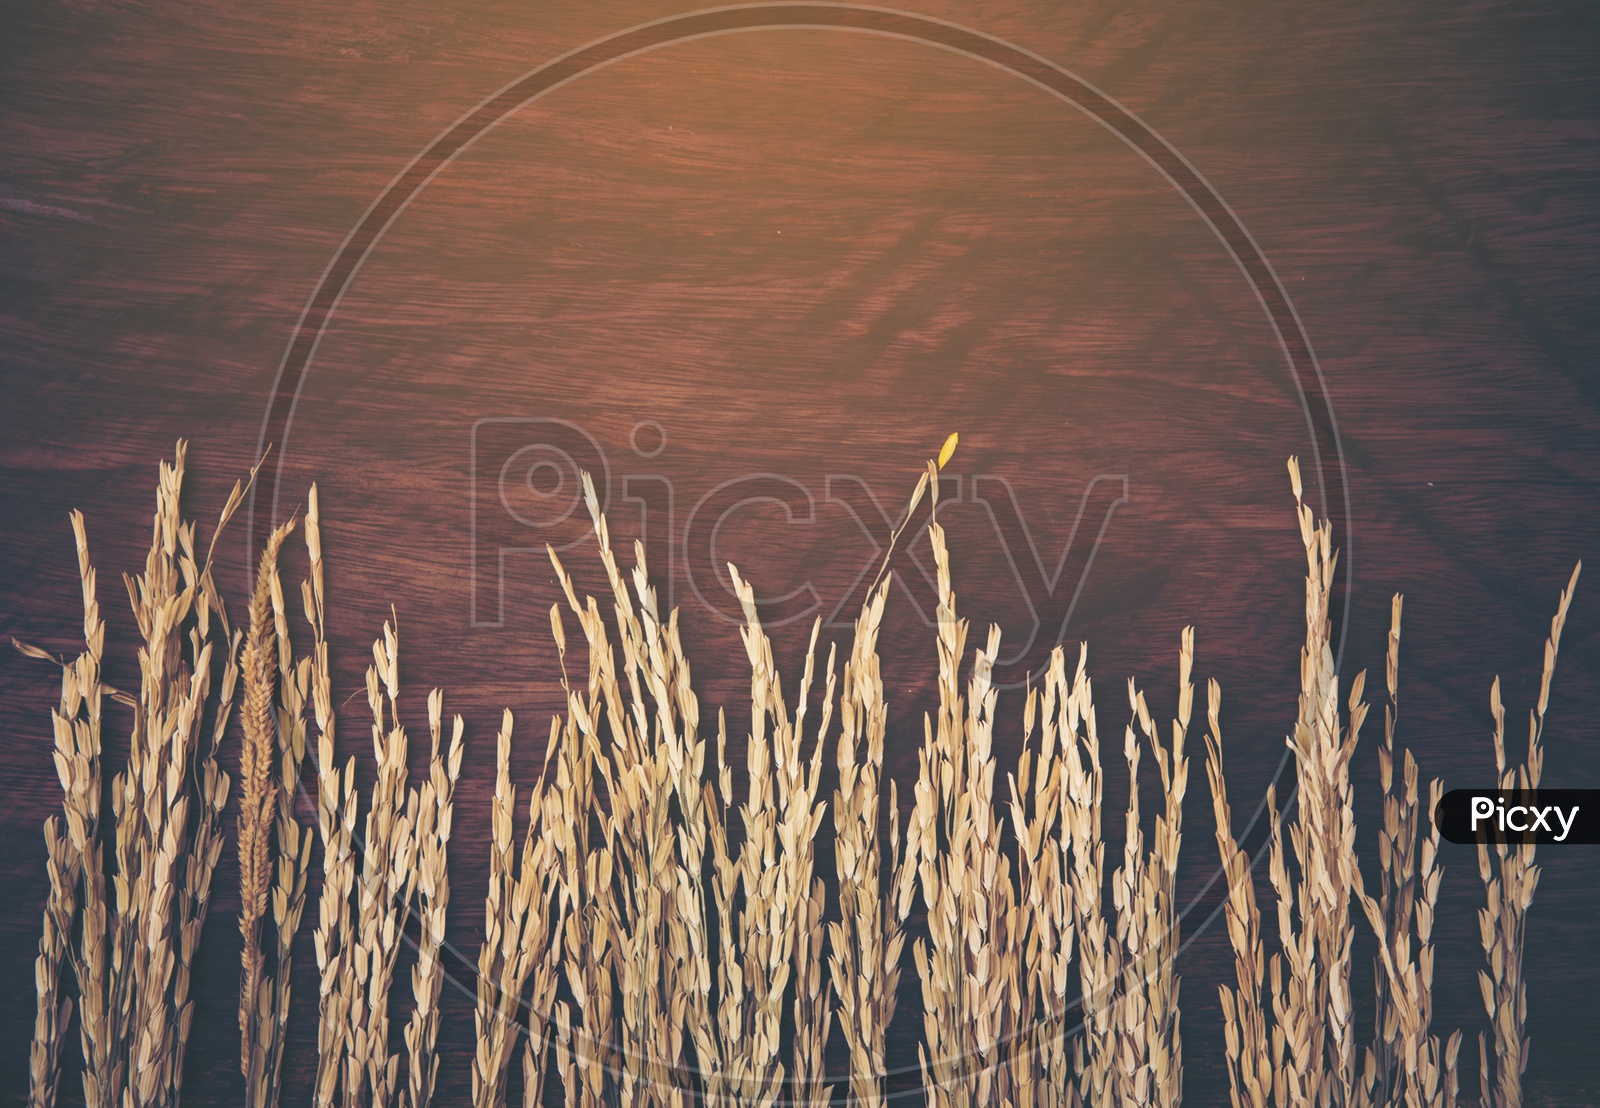 Dry wheat frame on wood background with vintage filter effect